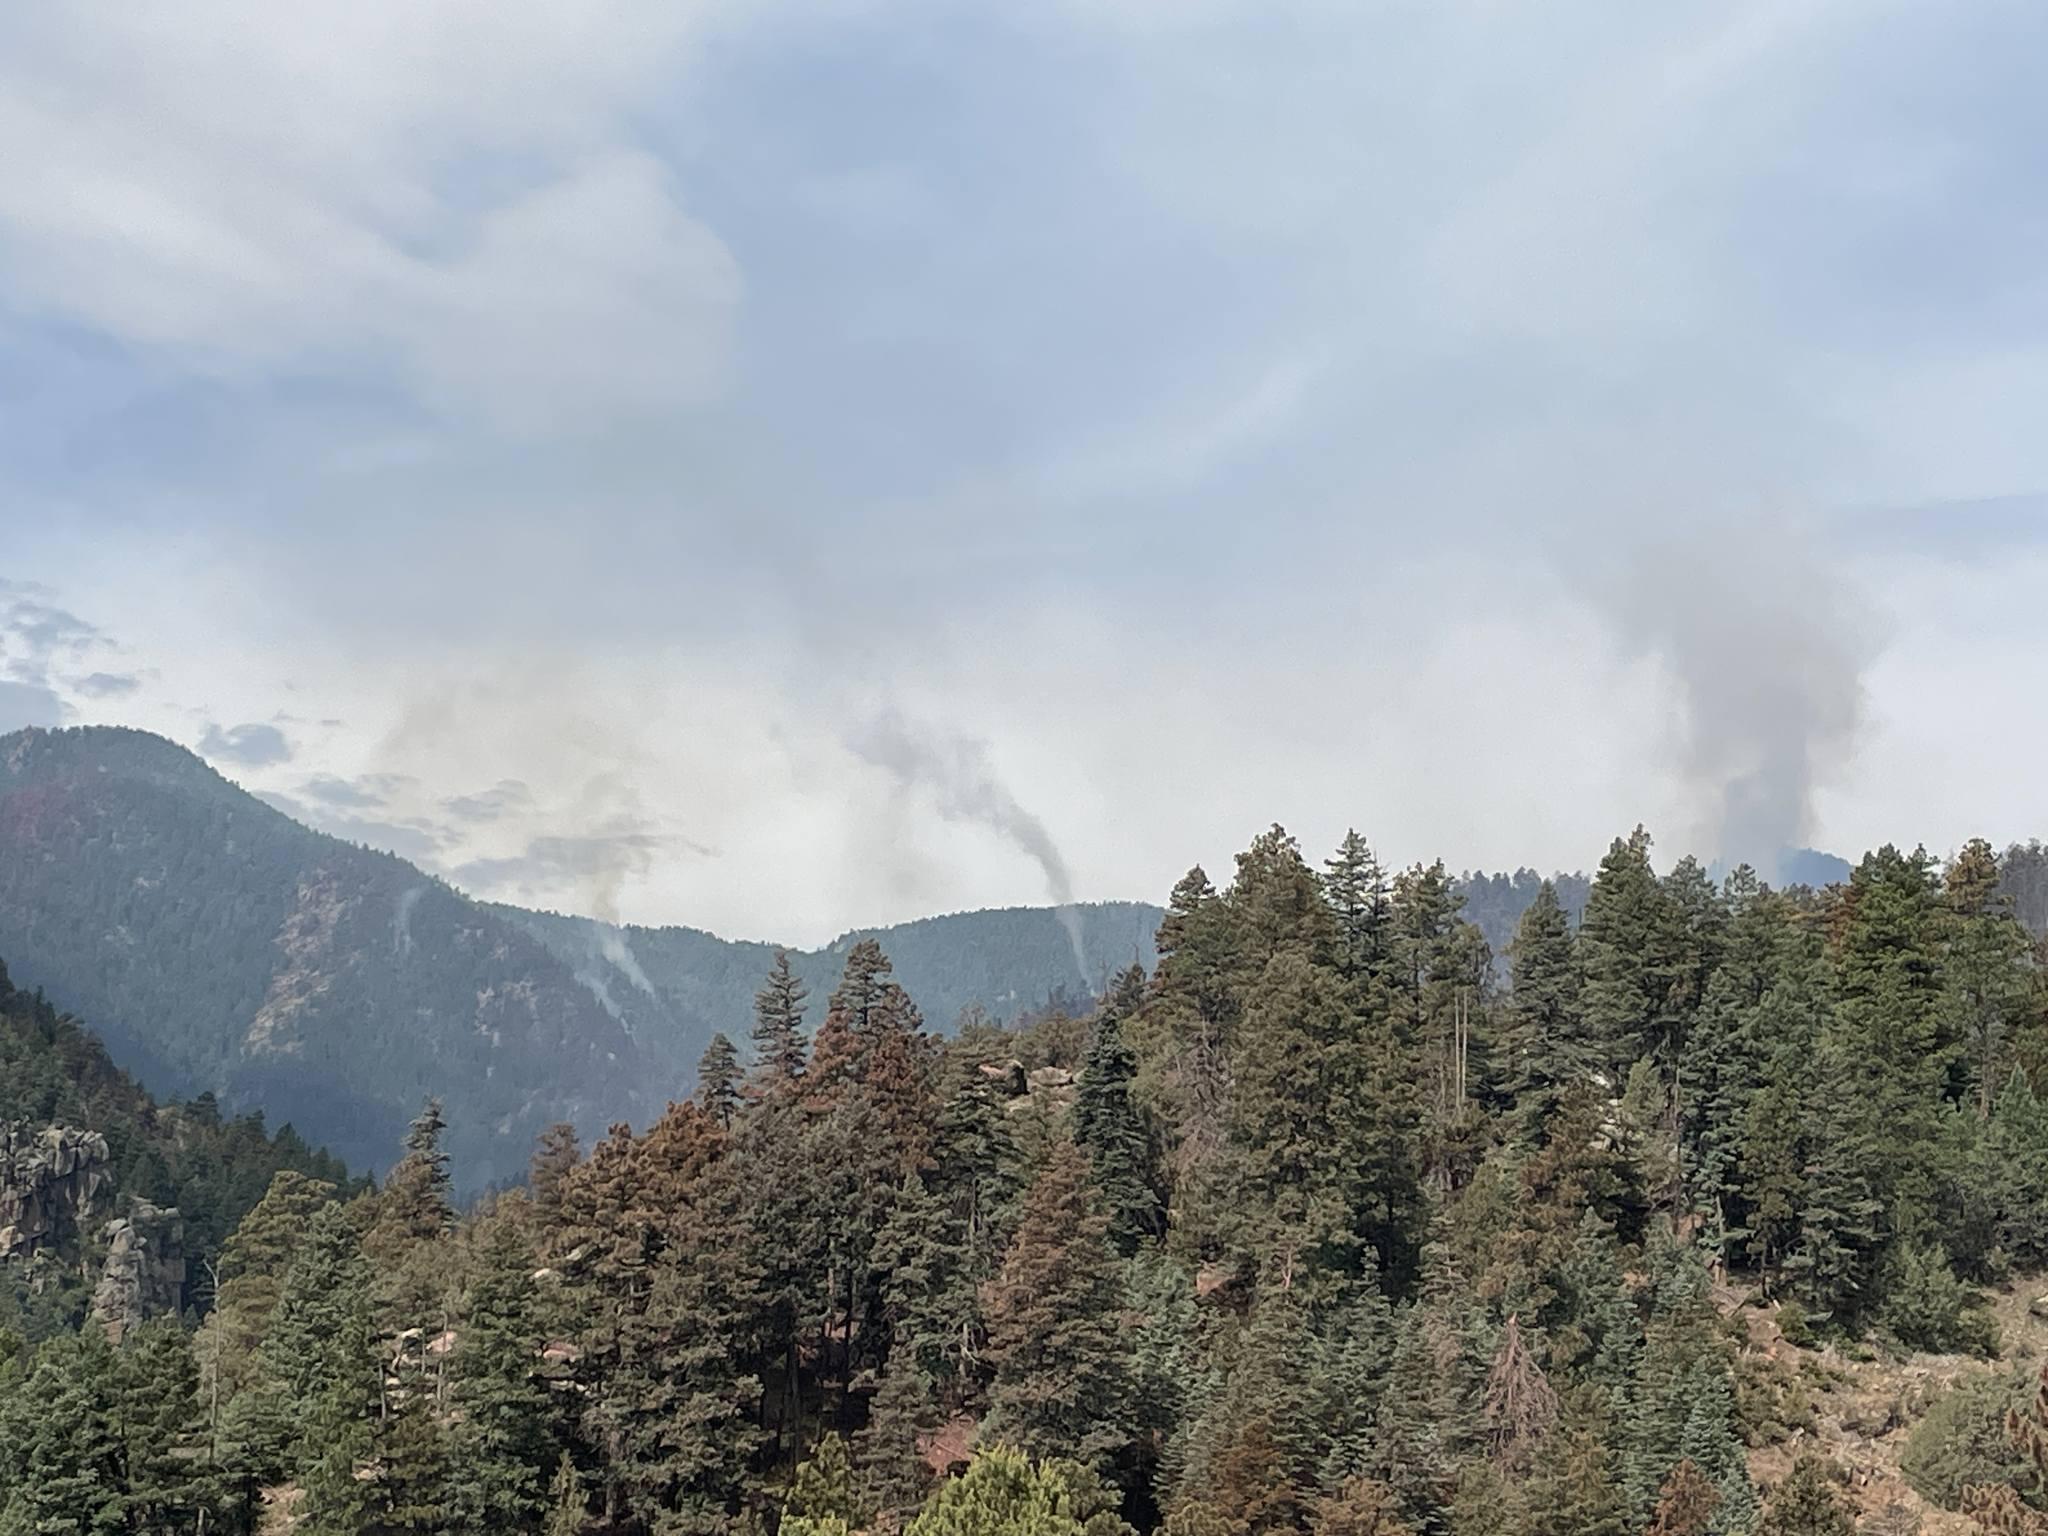 A wide view of smoke rising up from the fire. In the front, evergreen trees fill the photo, in the background, mountains with several small vertical columns of smoke rising towards a cloudy sky.